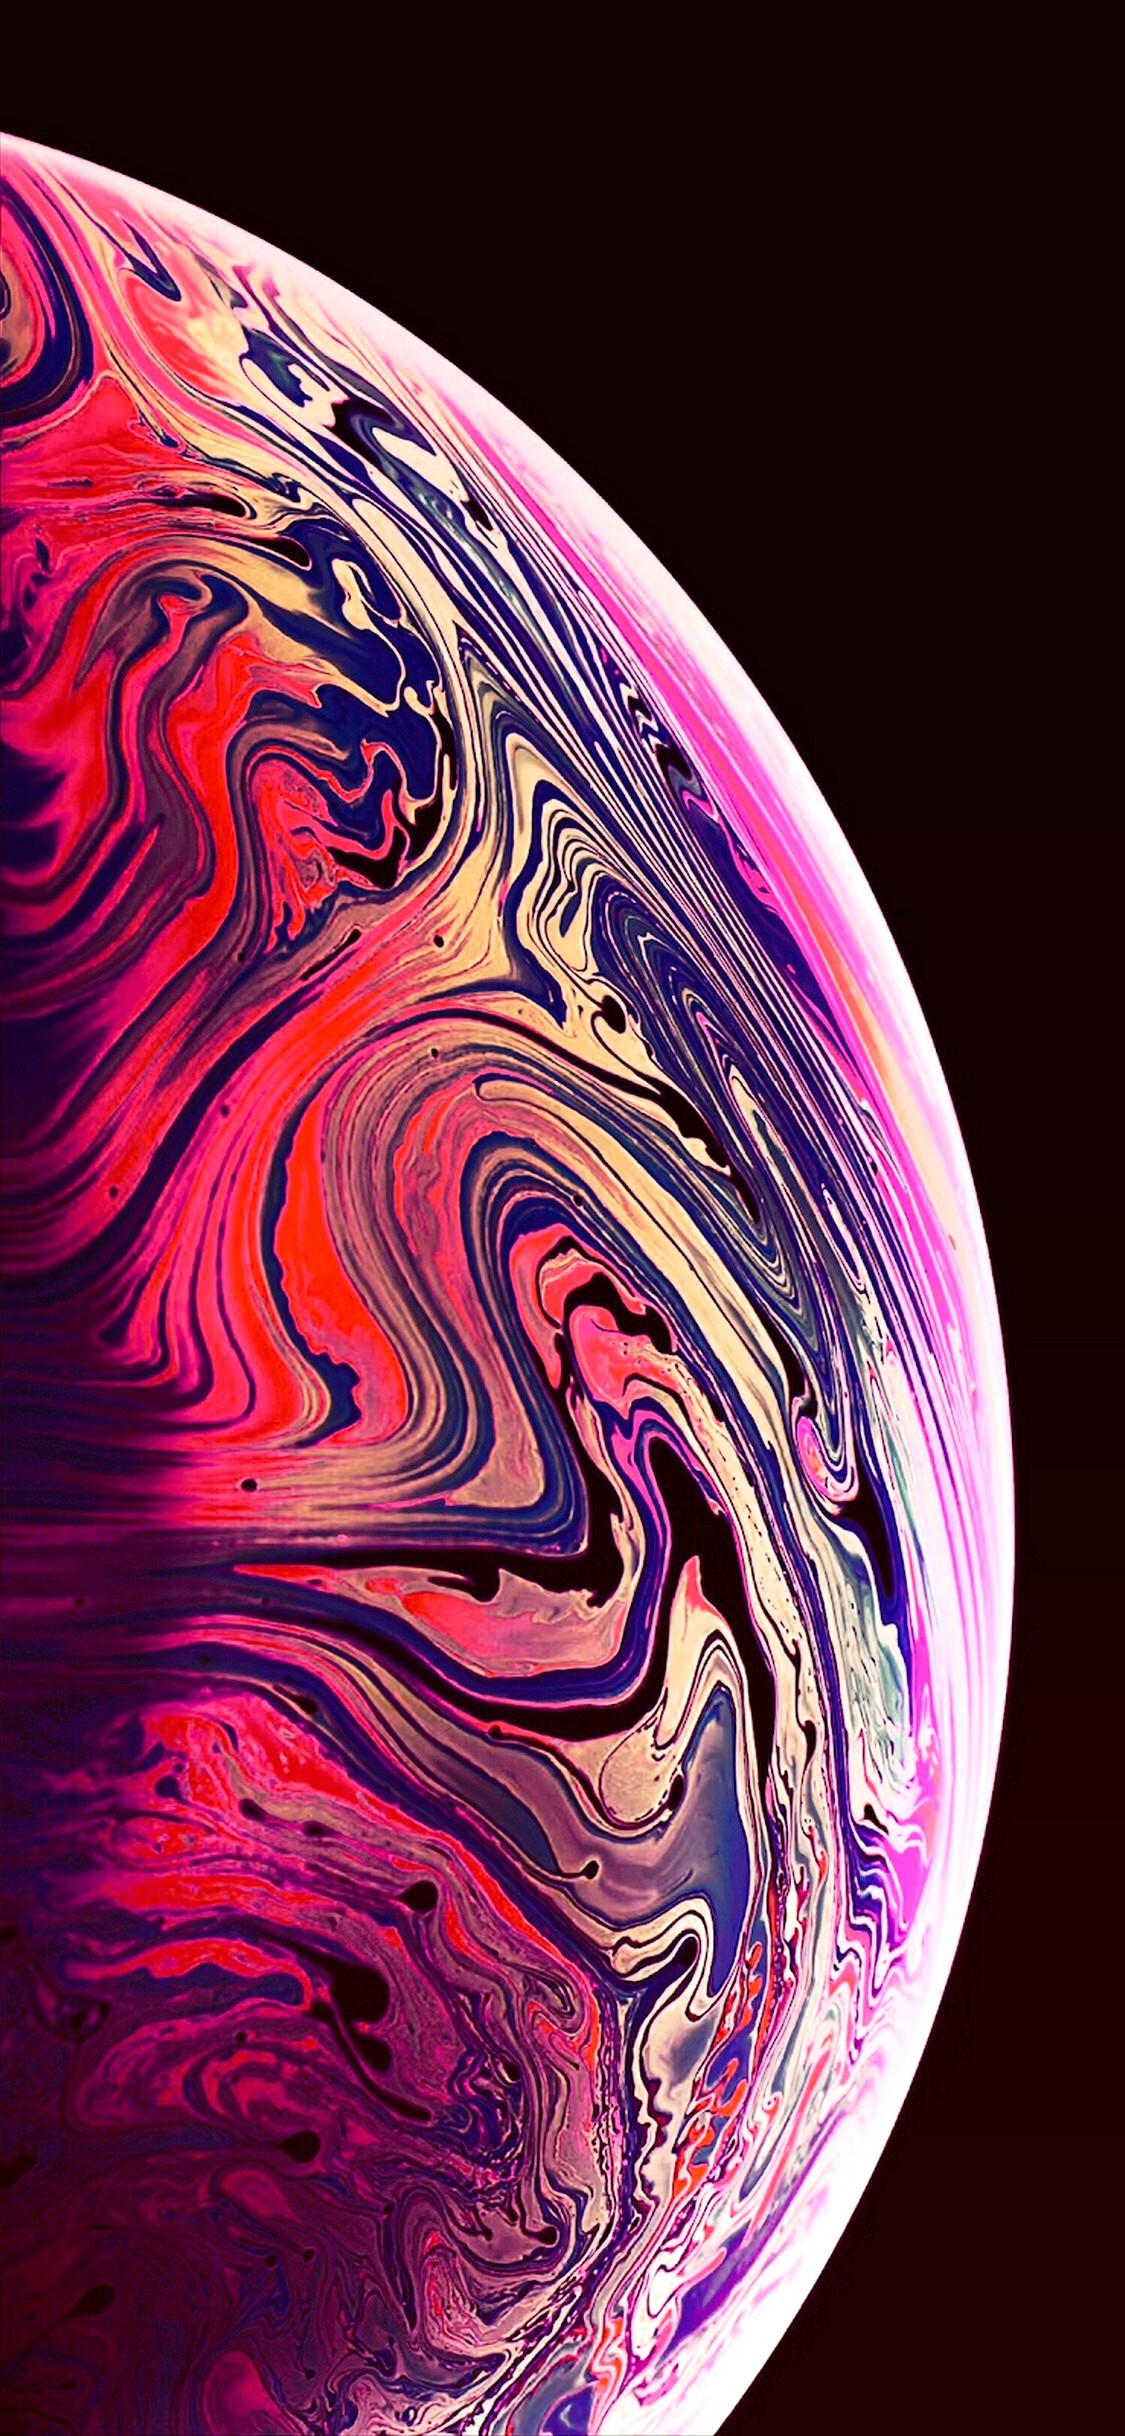 Iphone Xs Wallpaper Home Screen With High-resolution - Iphone Xs Live Wallpaper Gif - HD Wallpaper 